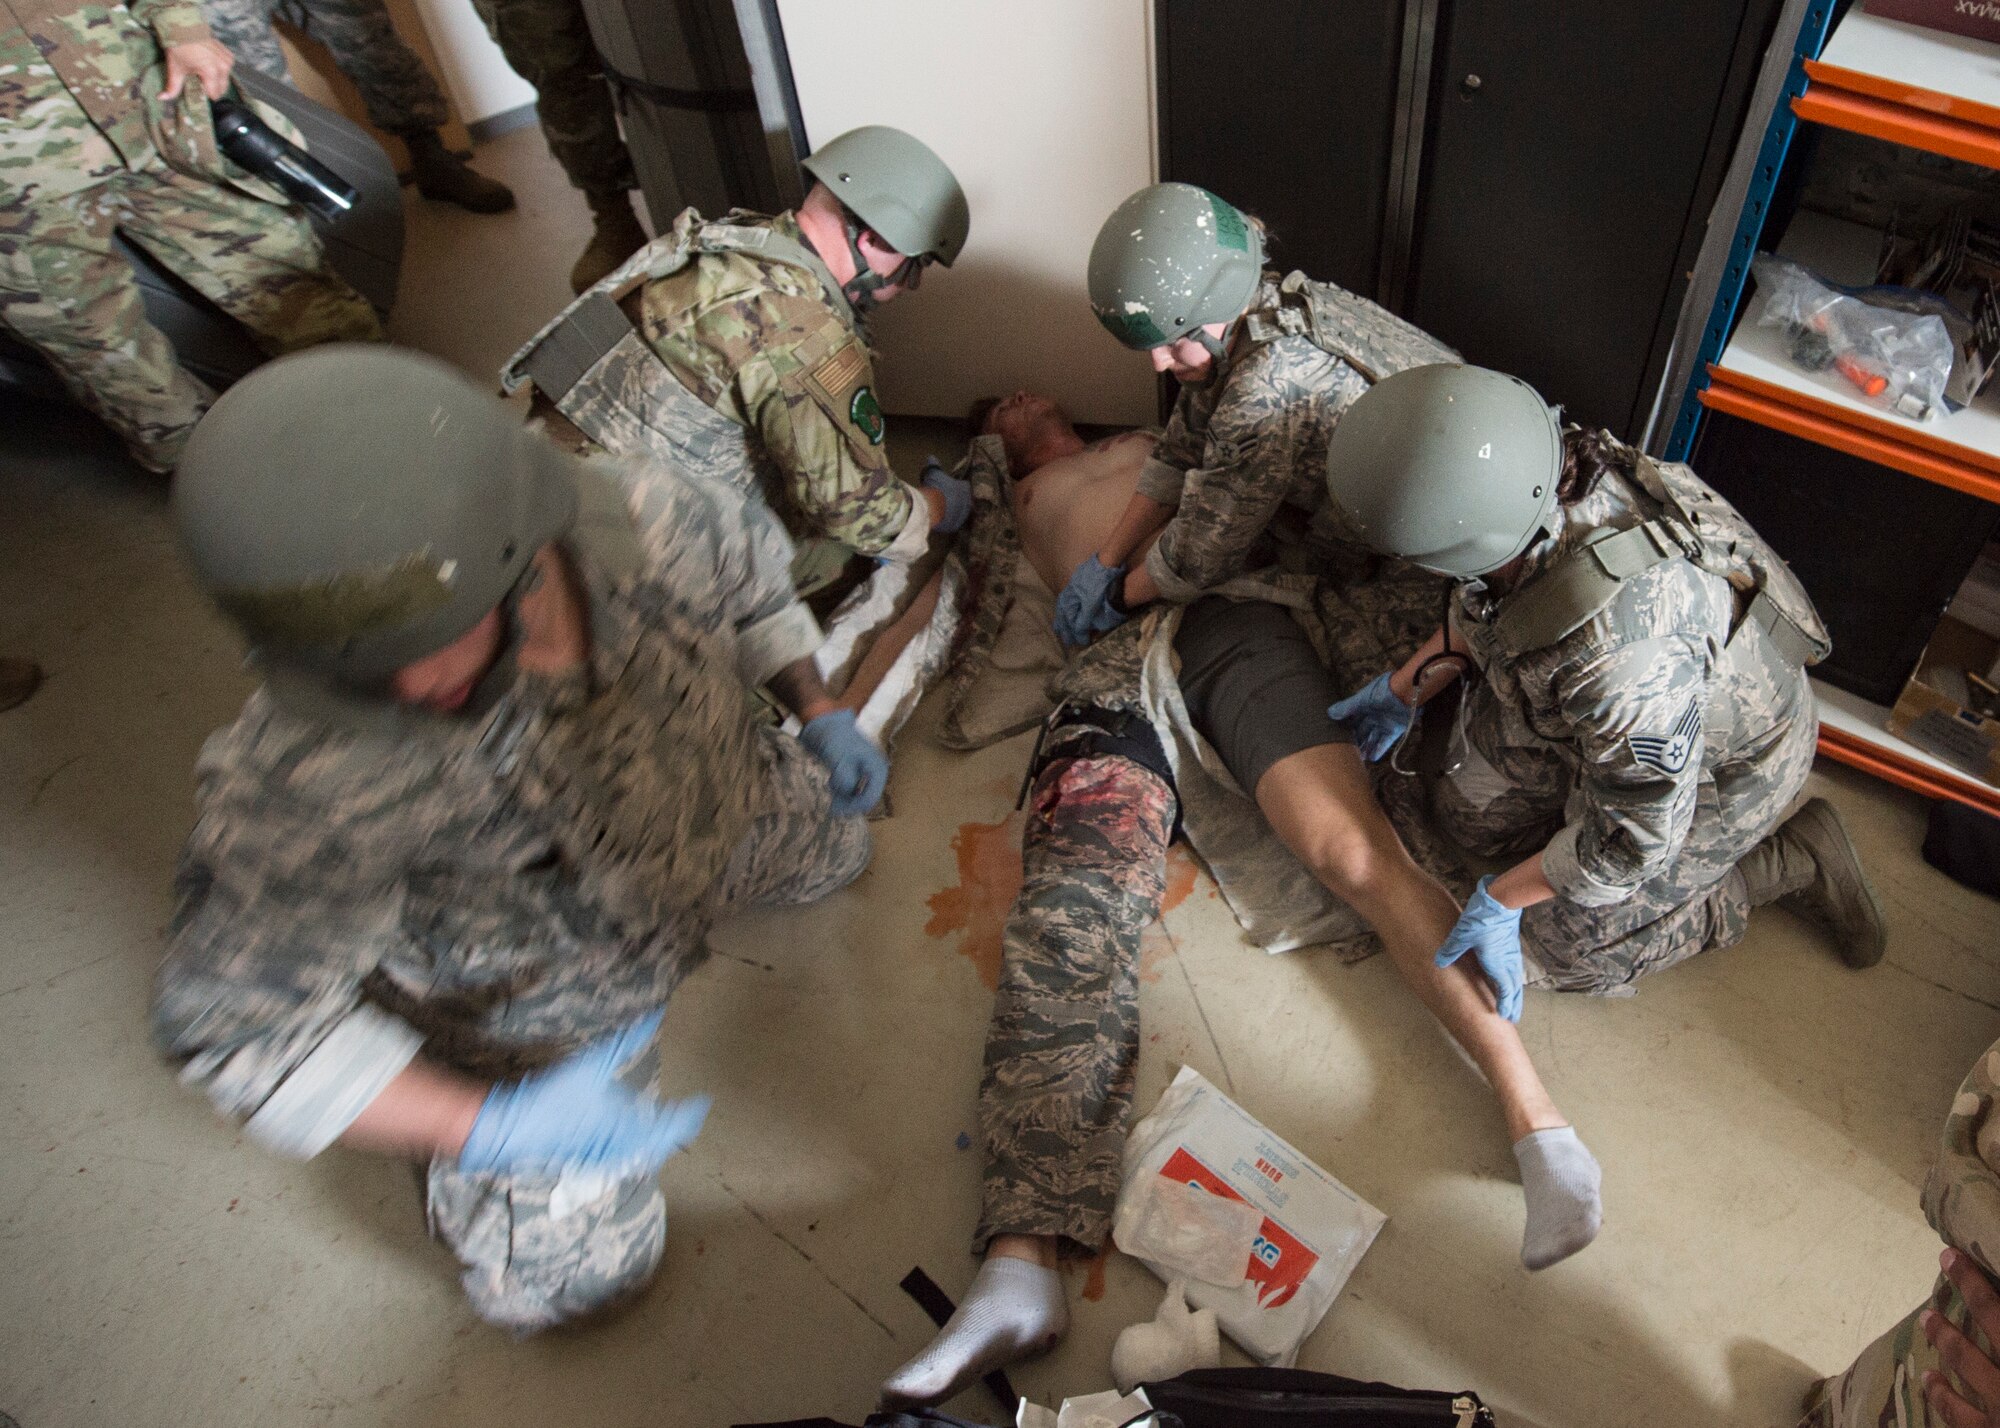 Medics respond to a simulated combat scenario of a victim with bullet wounds during the U.S. Air Forces in Europe EMT Rodeo at Ramstein Air Base, Germany, July 23, 2019. Training victims responded like real casualties by screaming, flailing, being disoriented, and noncompliant. (U.S. Air Force photo by Staff Sgt. Kirby Turbak)